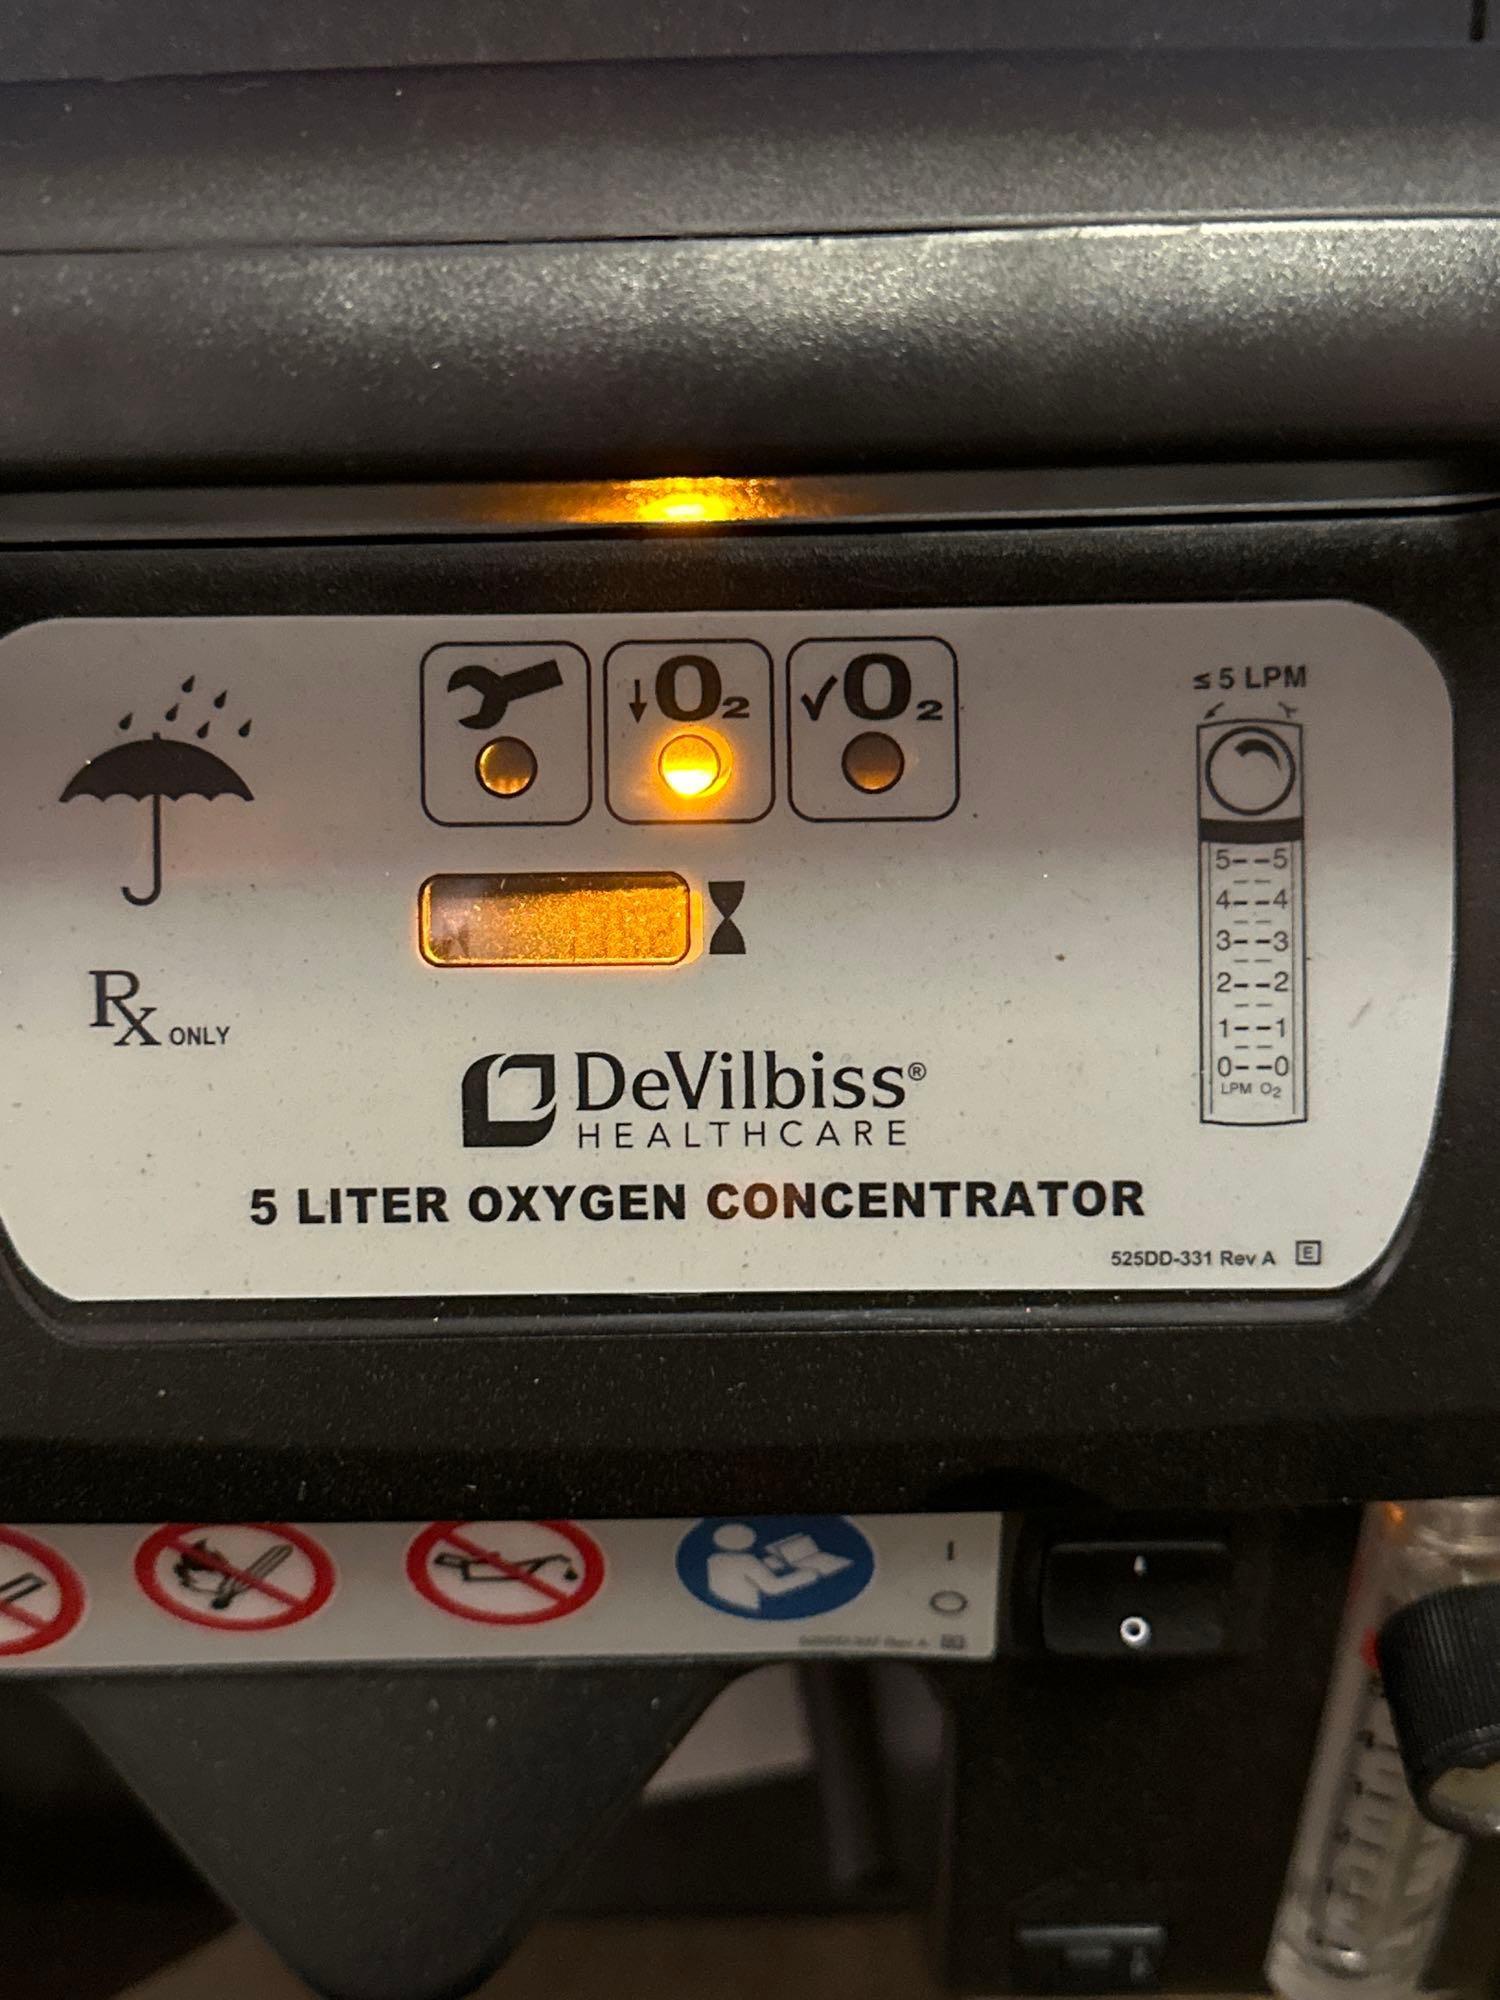 Devilbiss 5 Liter Oxygen Concentrator - works and Oxygen Tank with Cart